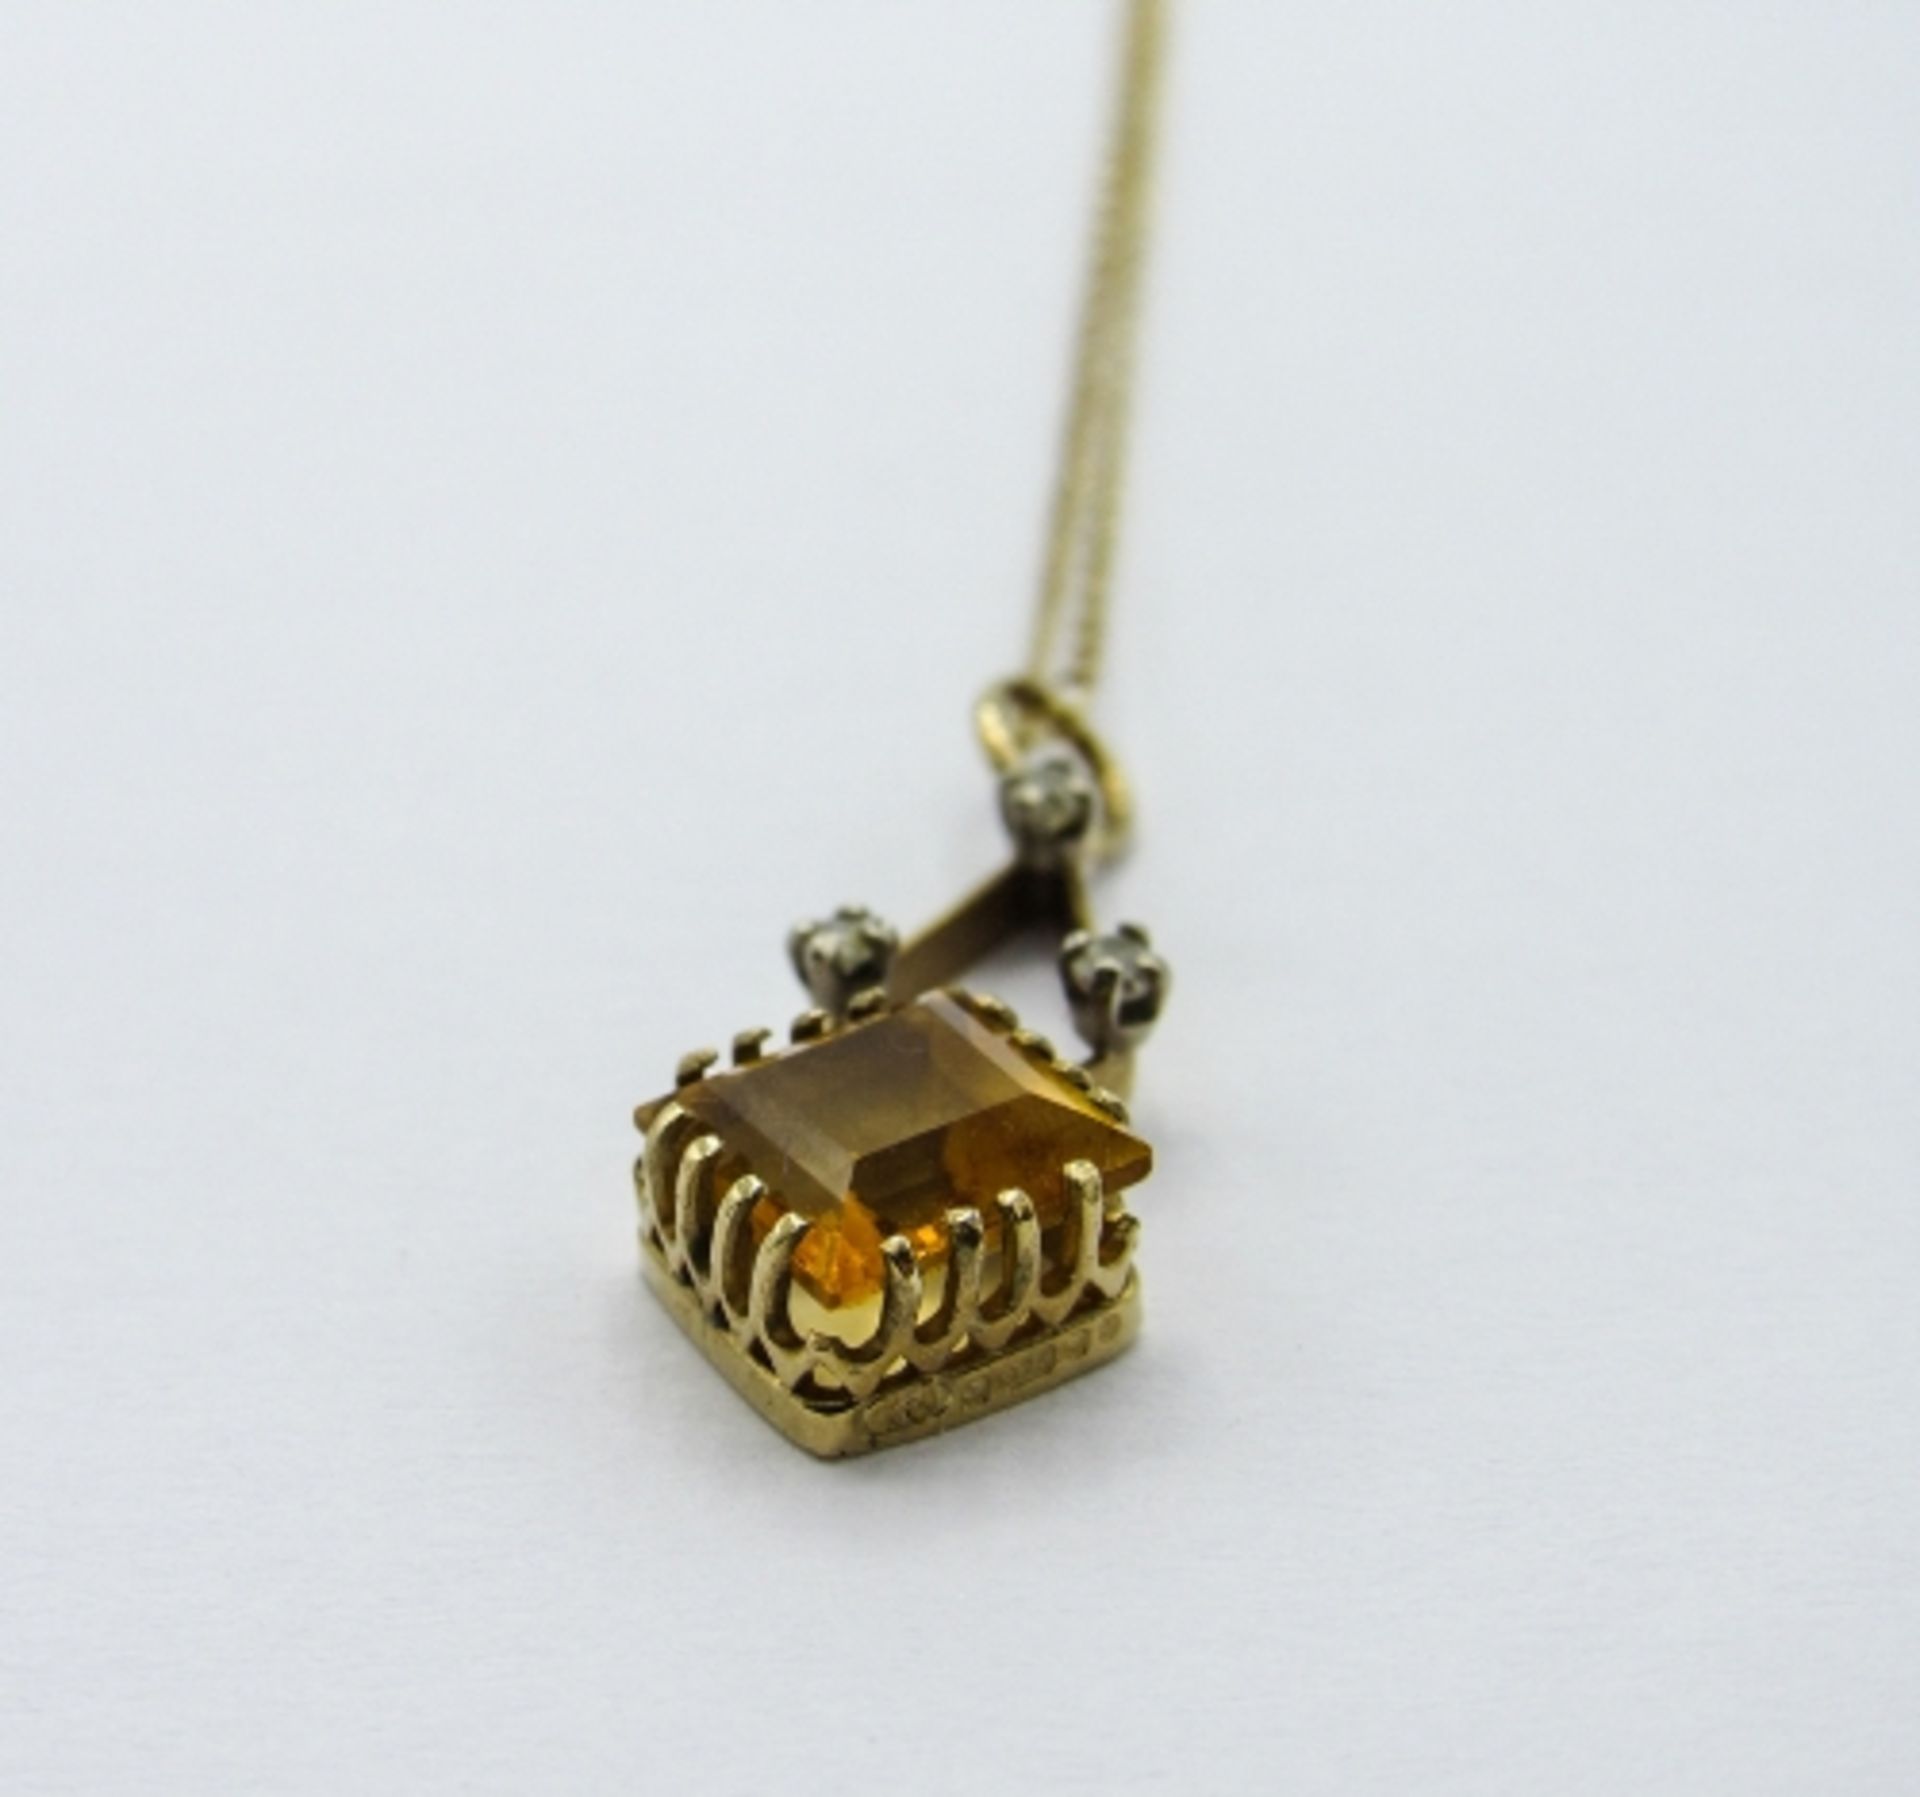 9ct gold & citrine pendant on a 9ct gold chain, weight 1.6gms, length 40cms. Estimate £20-30 - Image 2 of 3